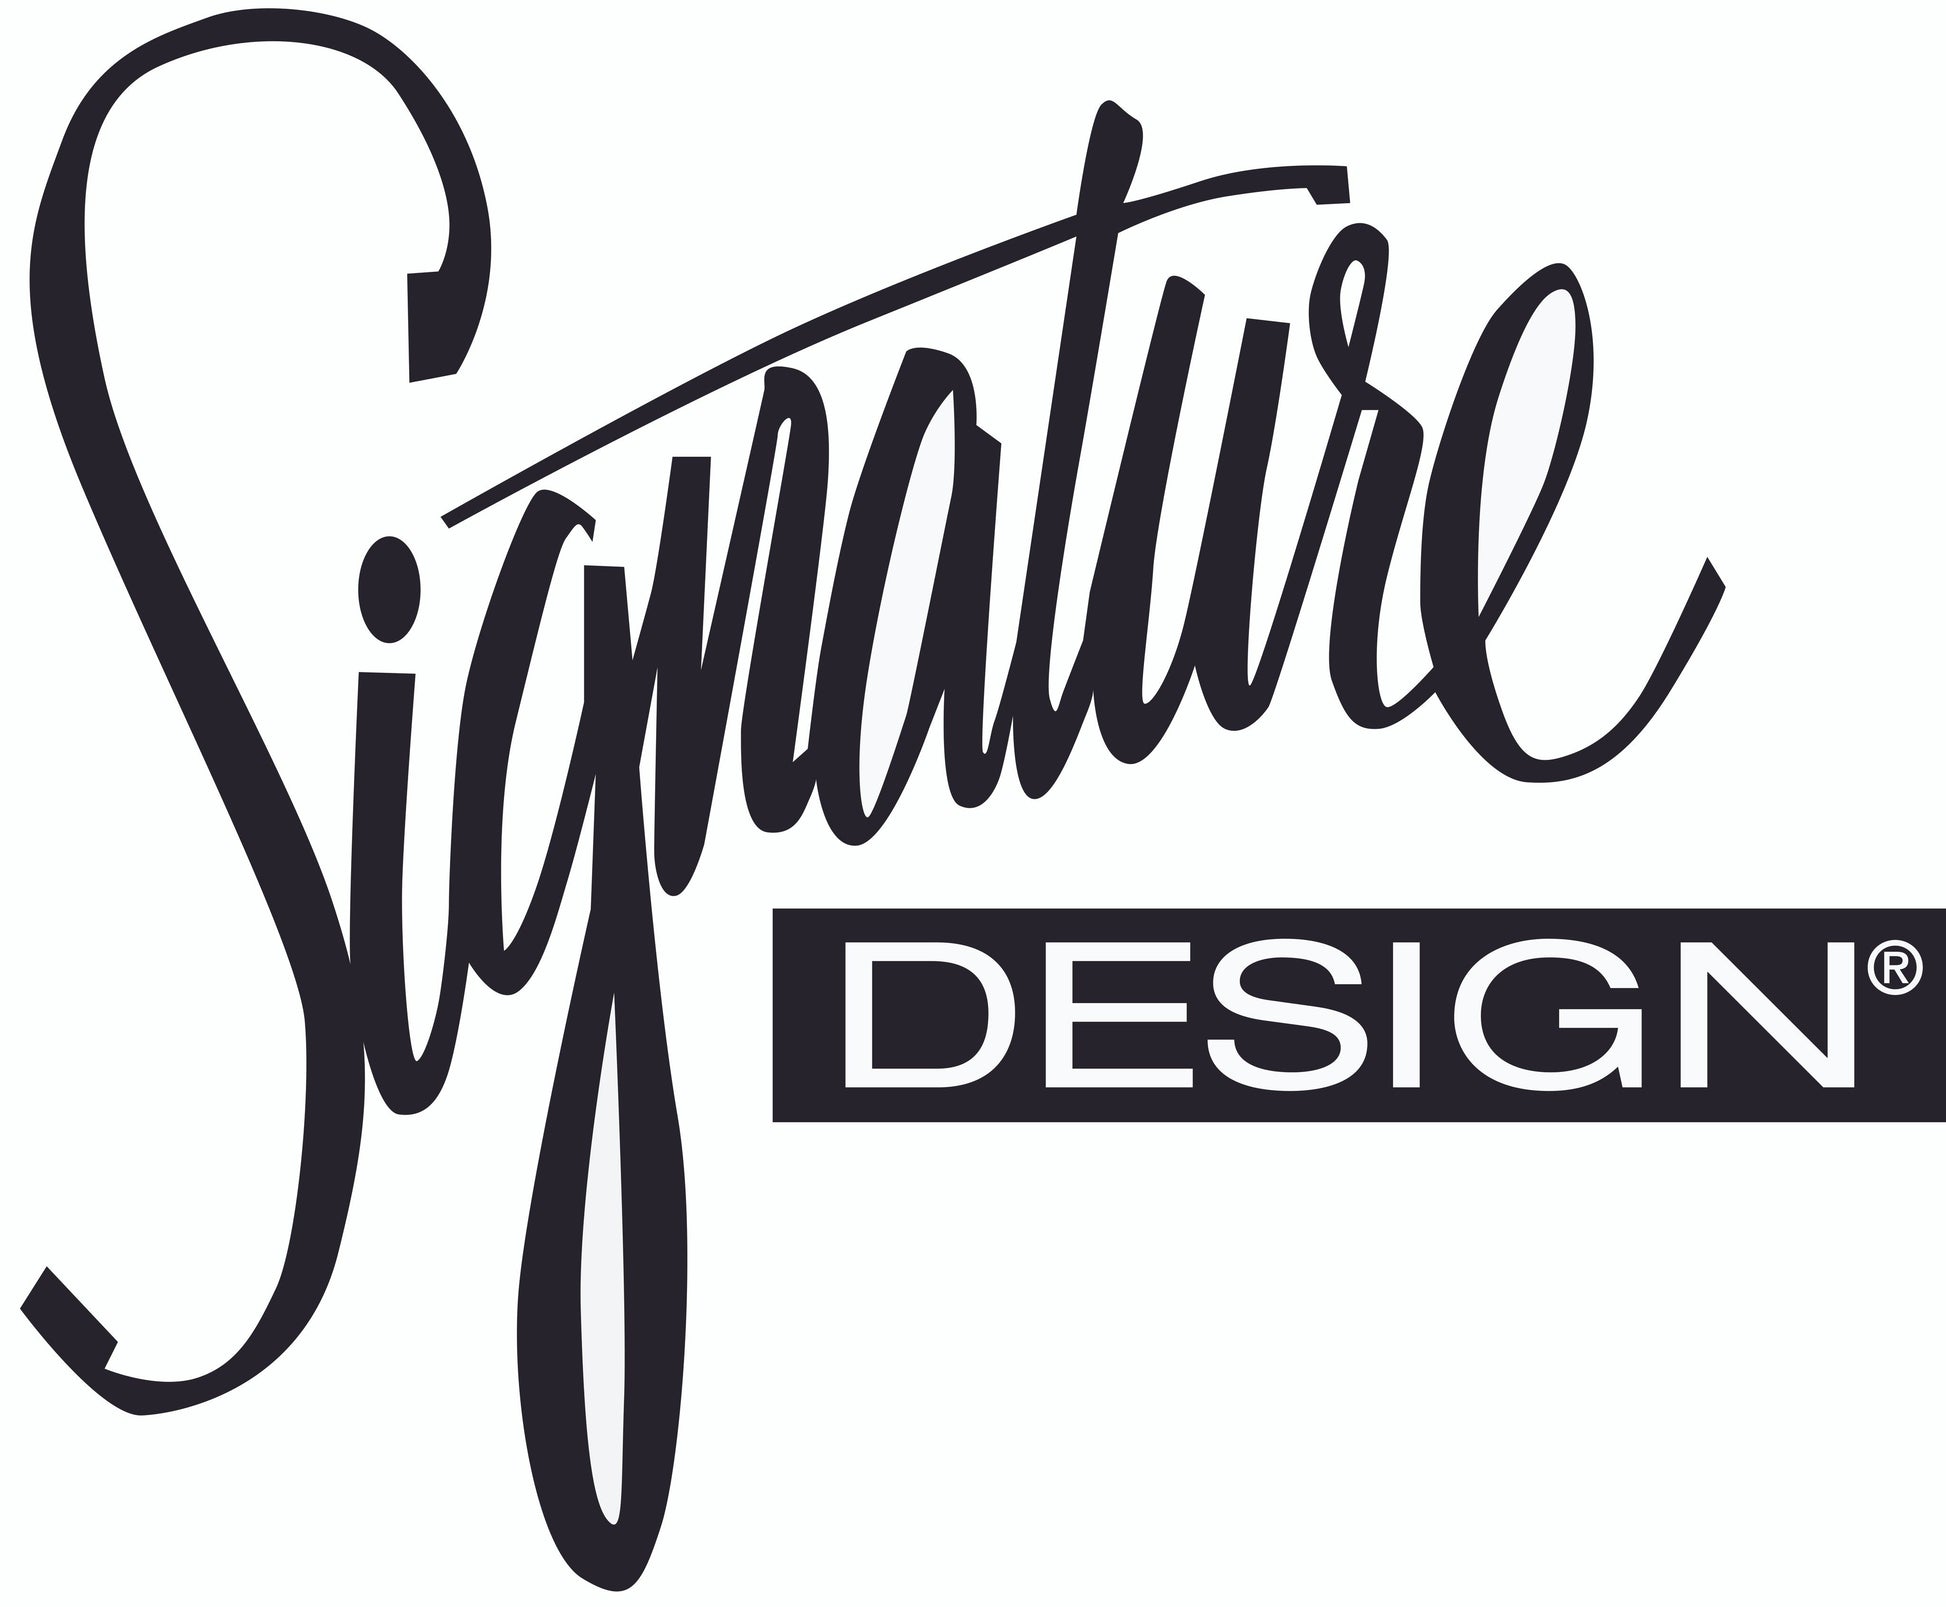 Coralayne Five Drawer Chest Signature Design by Ashley®